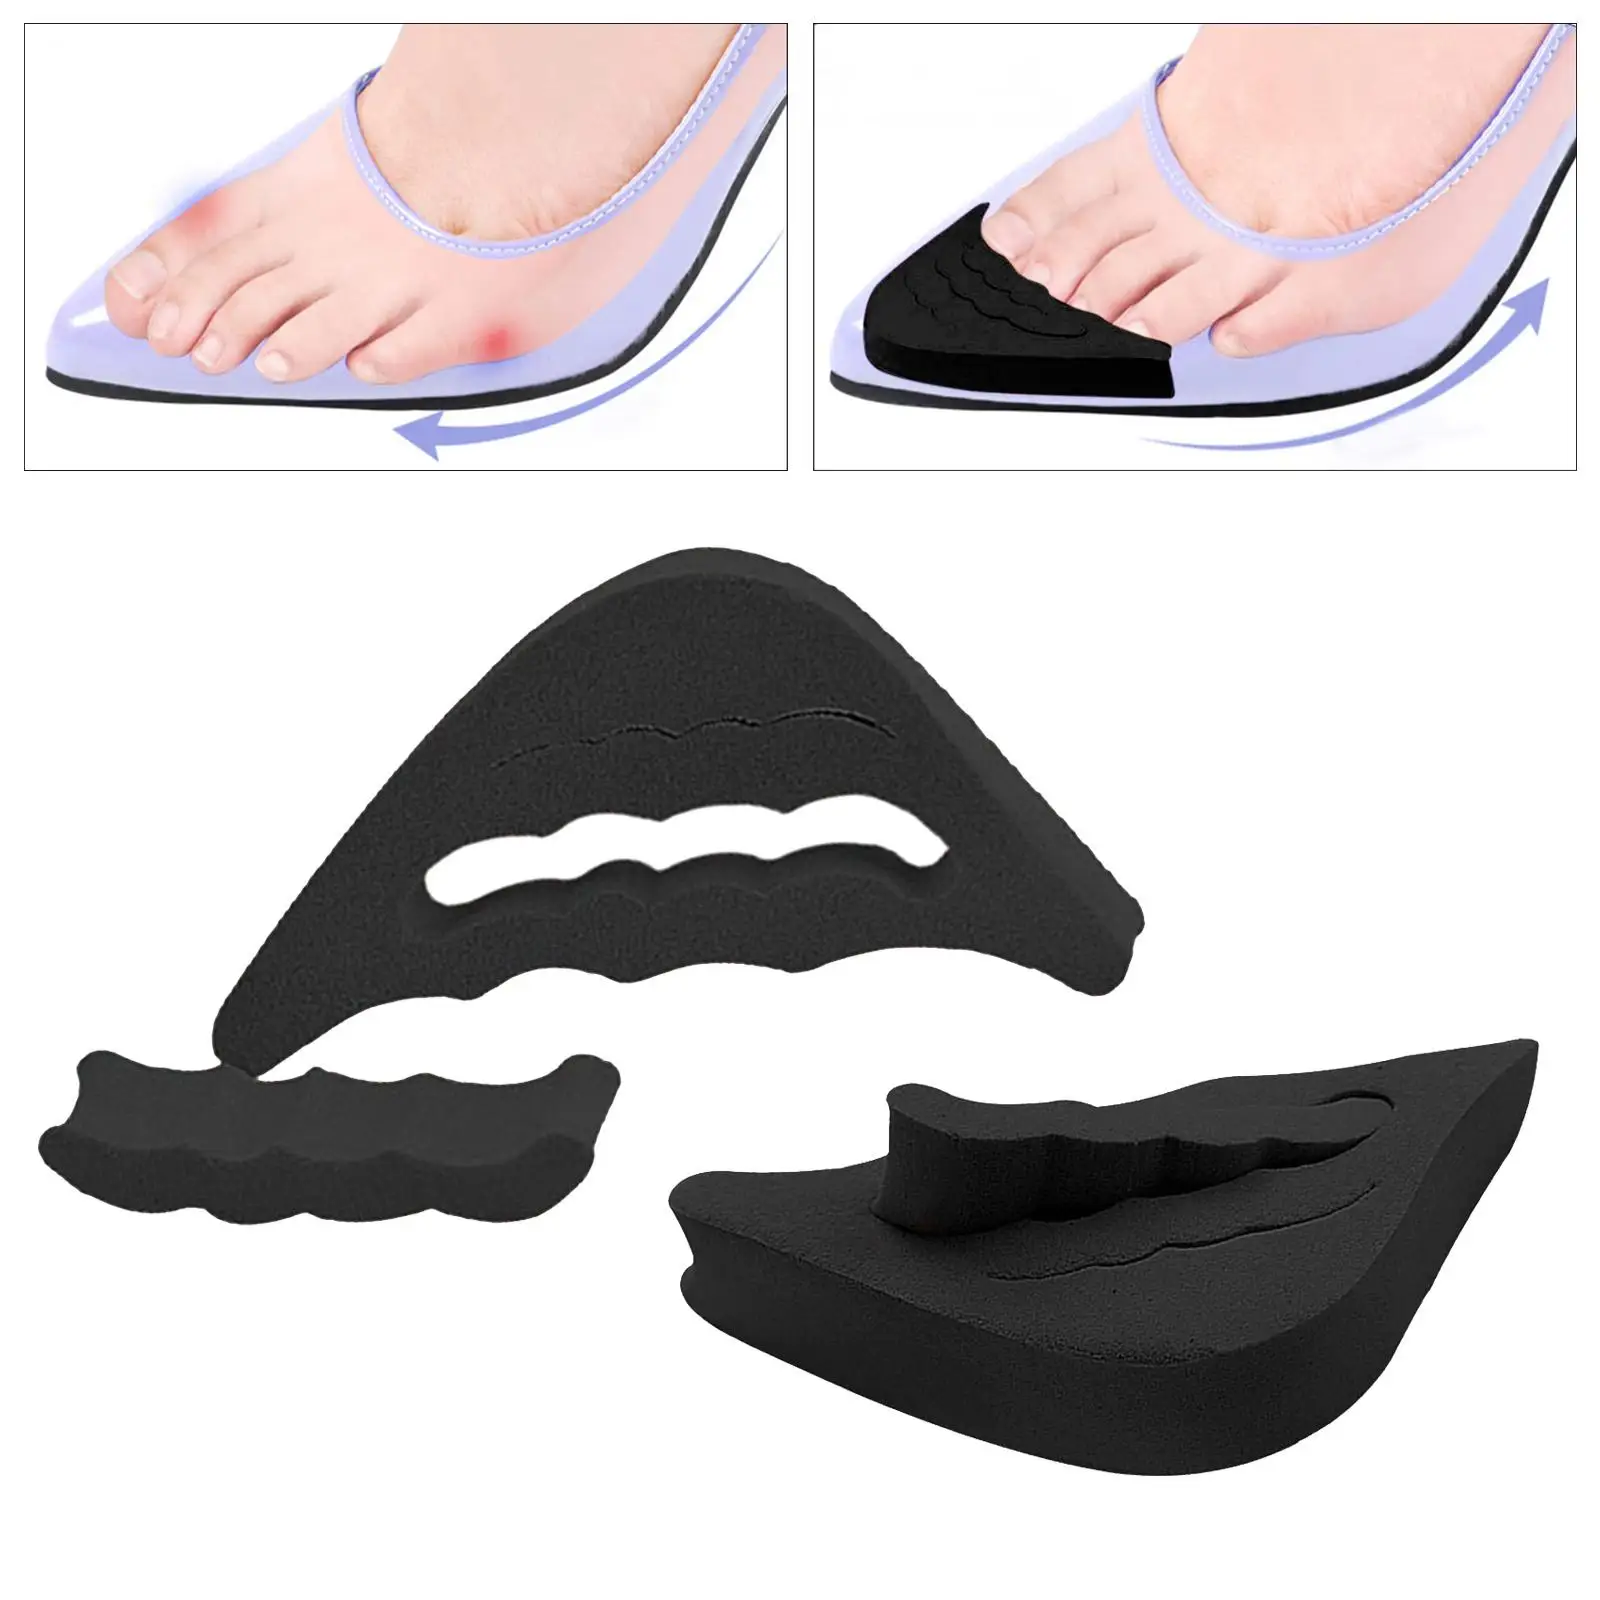 Toe Filler Inserts Pad Toes Forefoot Pads Foot Cushion Pads Nonslip Reusable Insoles Toe Plug for Running Shopping Outdoor